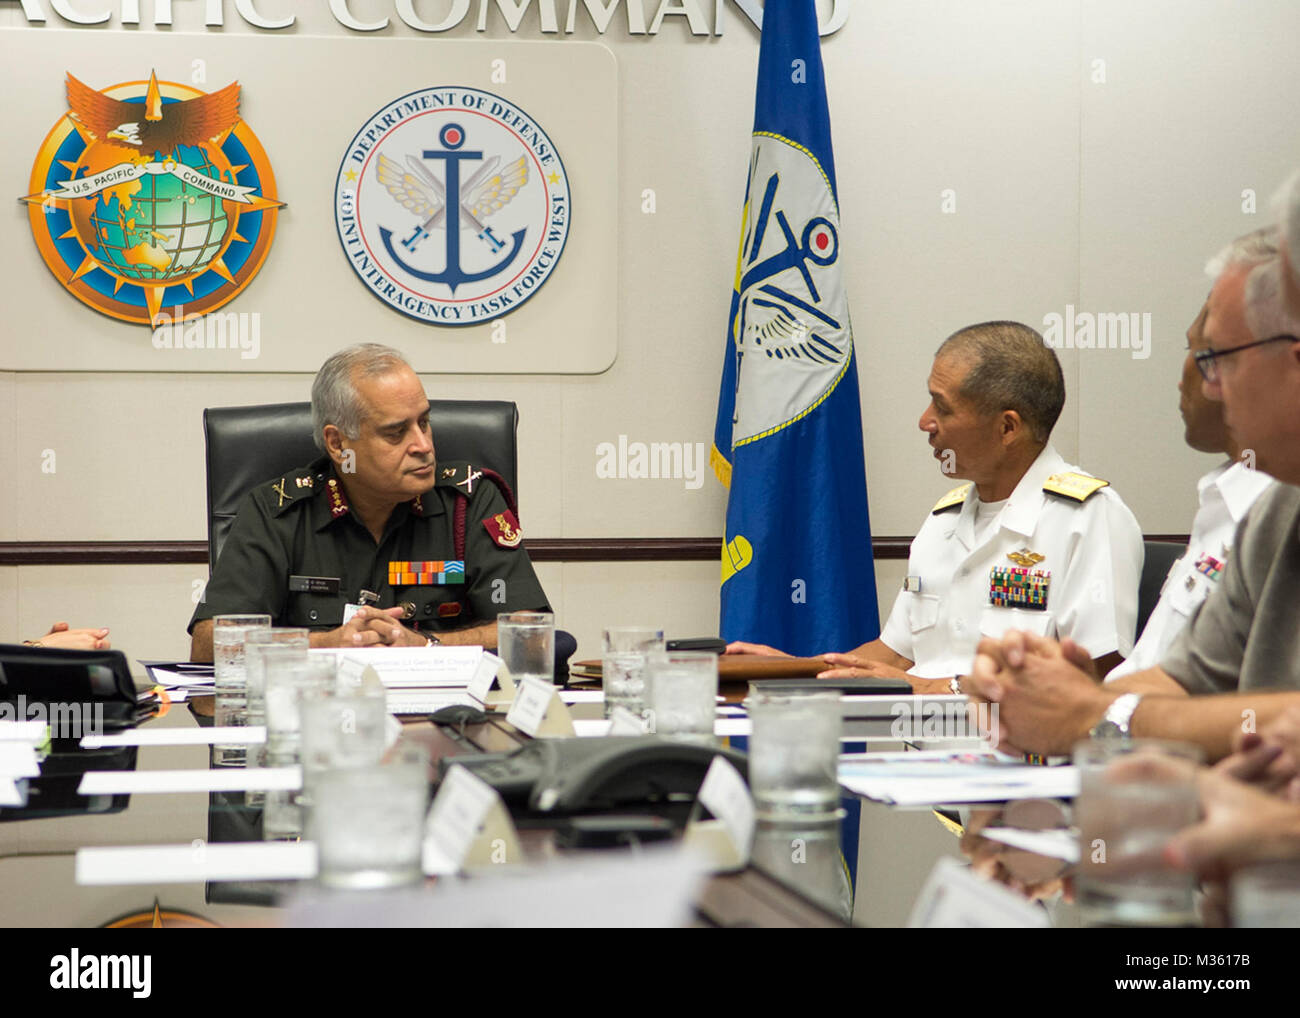 150728-N-DX698-010 CAMP H.M. SMITH, Hawaii (July 28, 2015) Lt. Gen. BK Chopra, Indian Director General Armed Forces Medical Services, left, Rear Adm. Colin G. Chen, command surgeon of U.S. Pacific Command (USPACOM) and staff members discuss the cooperation between U.S. medical units and India medical force. This is the first India official to visit USPACOM to build relationships and explore future health engagements. (U.S. Navy photo by Mass Communication Specialist 1st Class Jay M. Chu/Released) Indian Director General Armed Forces Medical Services Visits PACOM by #PACOM Stock Photo